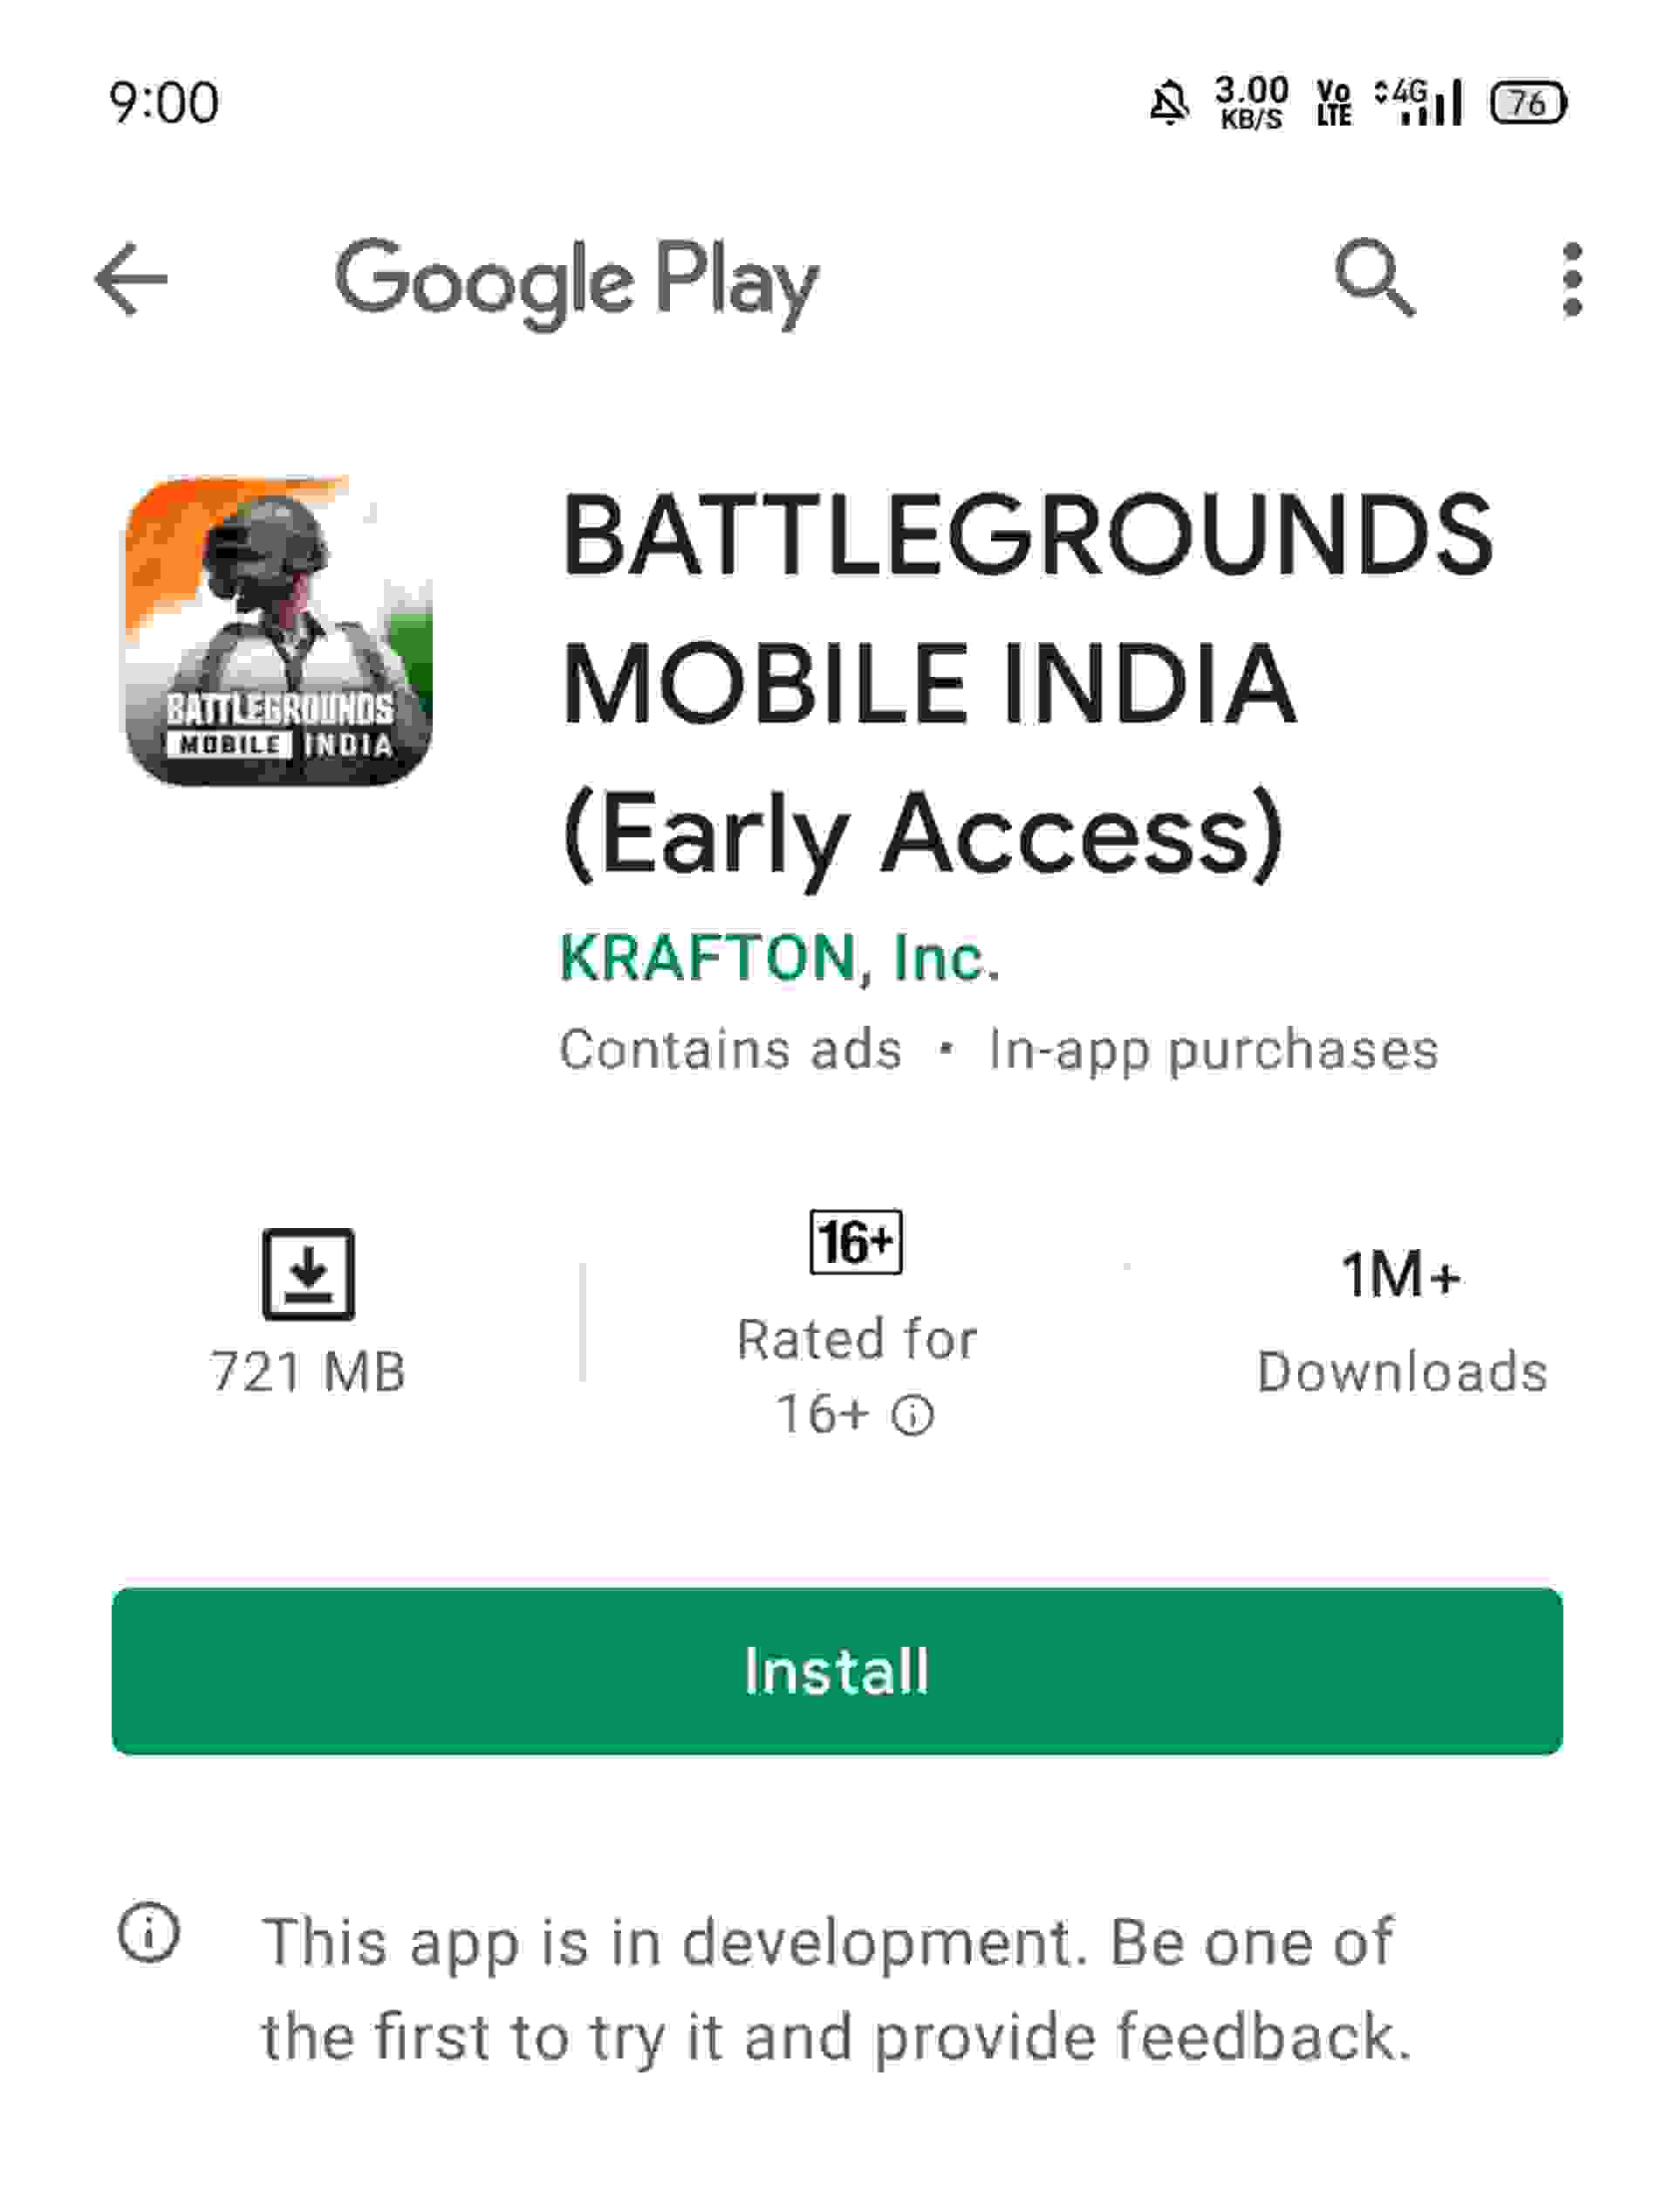 Battleground Mobile India download link early access